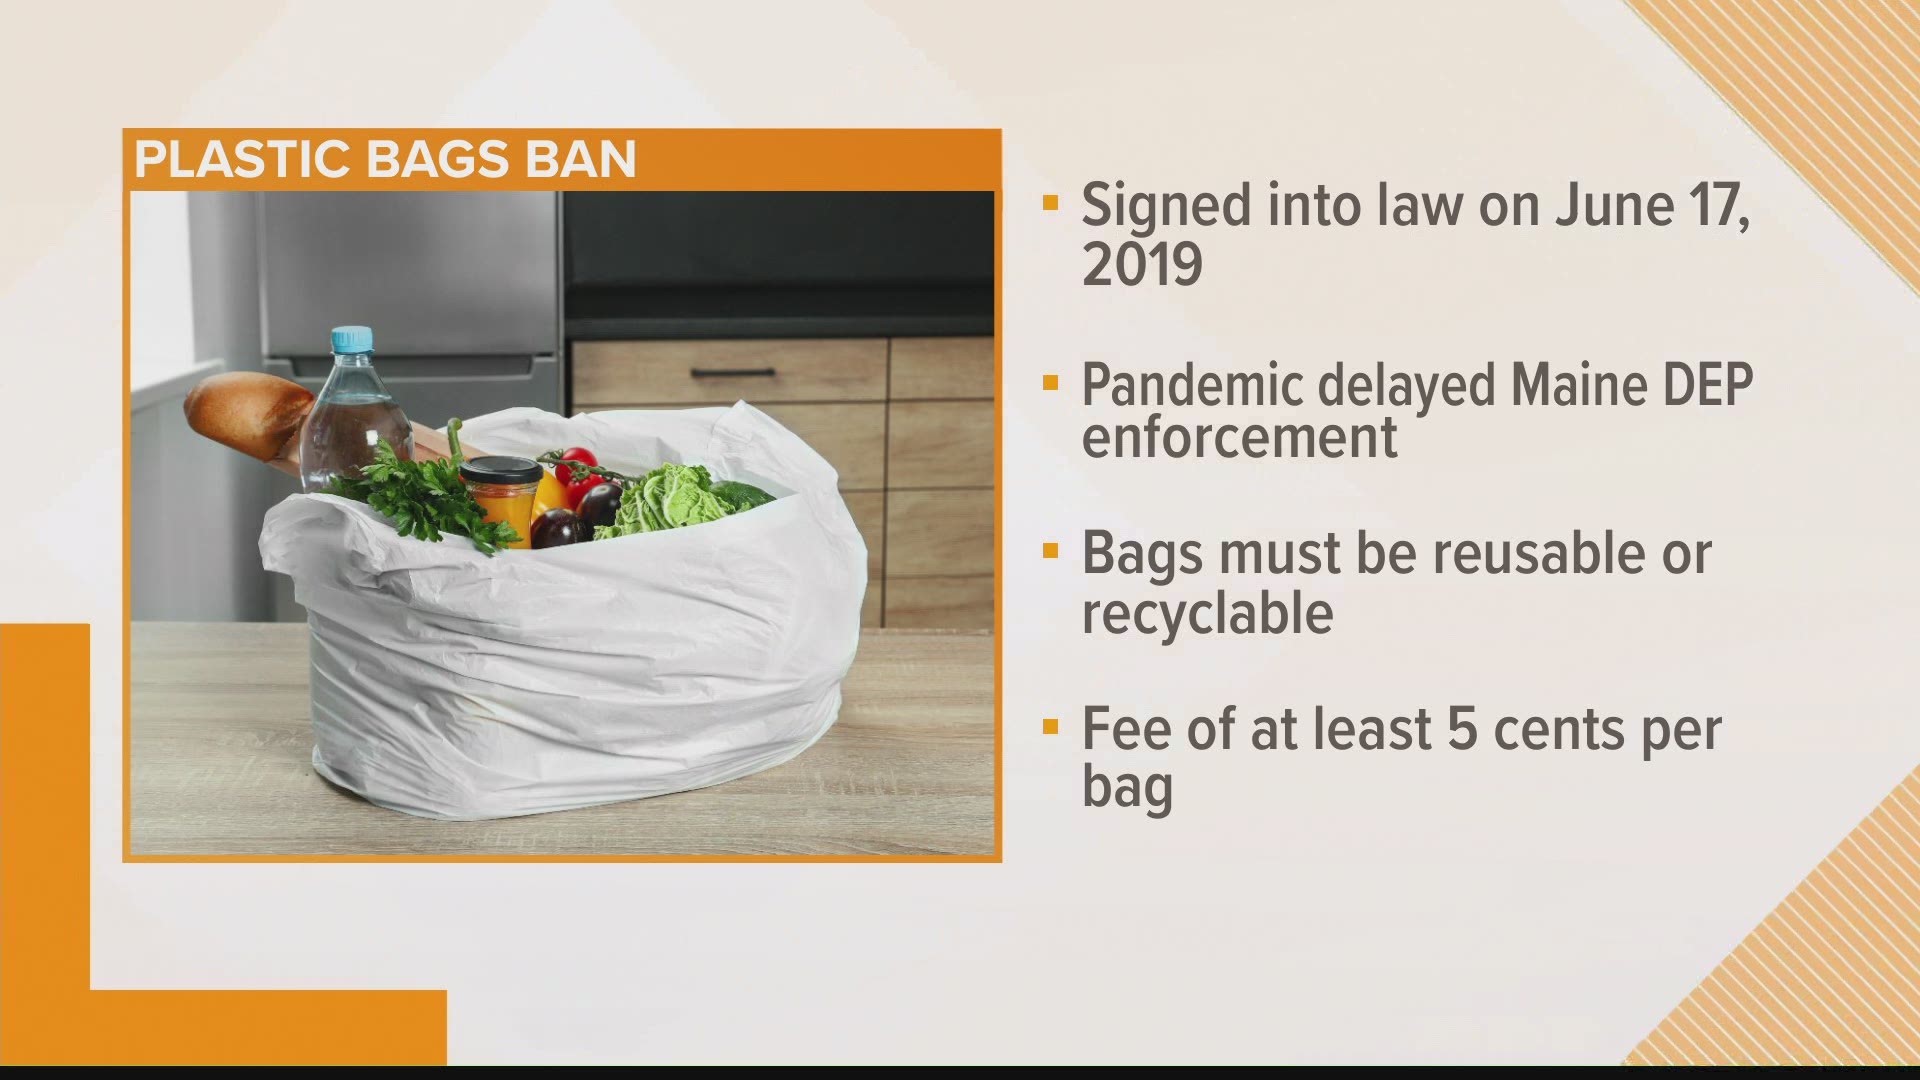 Maine retailers are no longer allowed to give out single-use plastic bags or polystyrene foam disposable food containers in most cases, as of July 1, 2021.